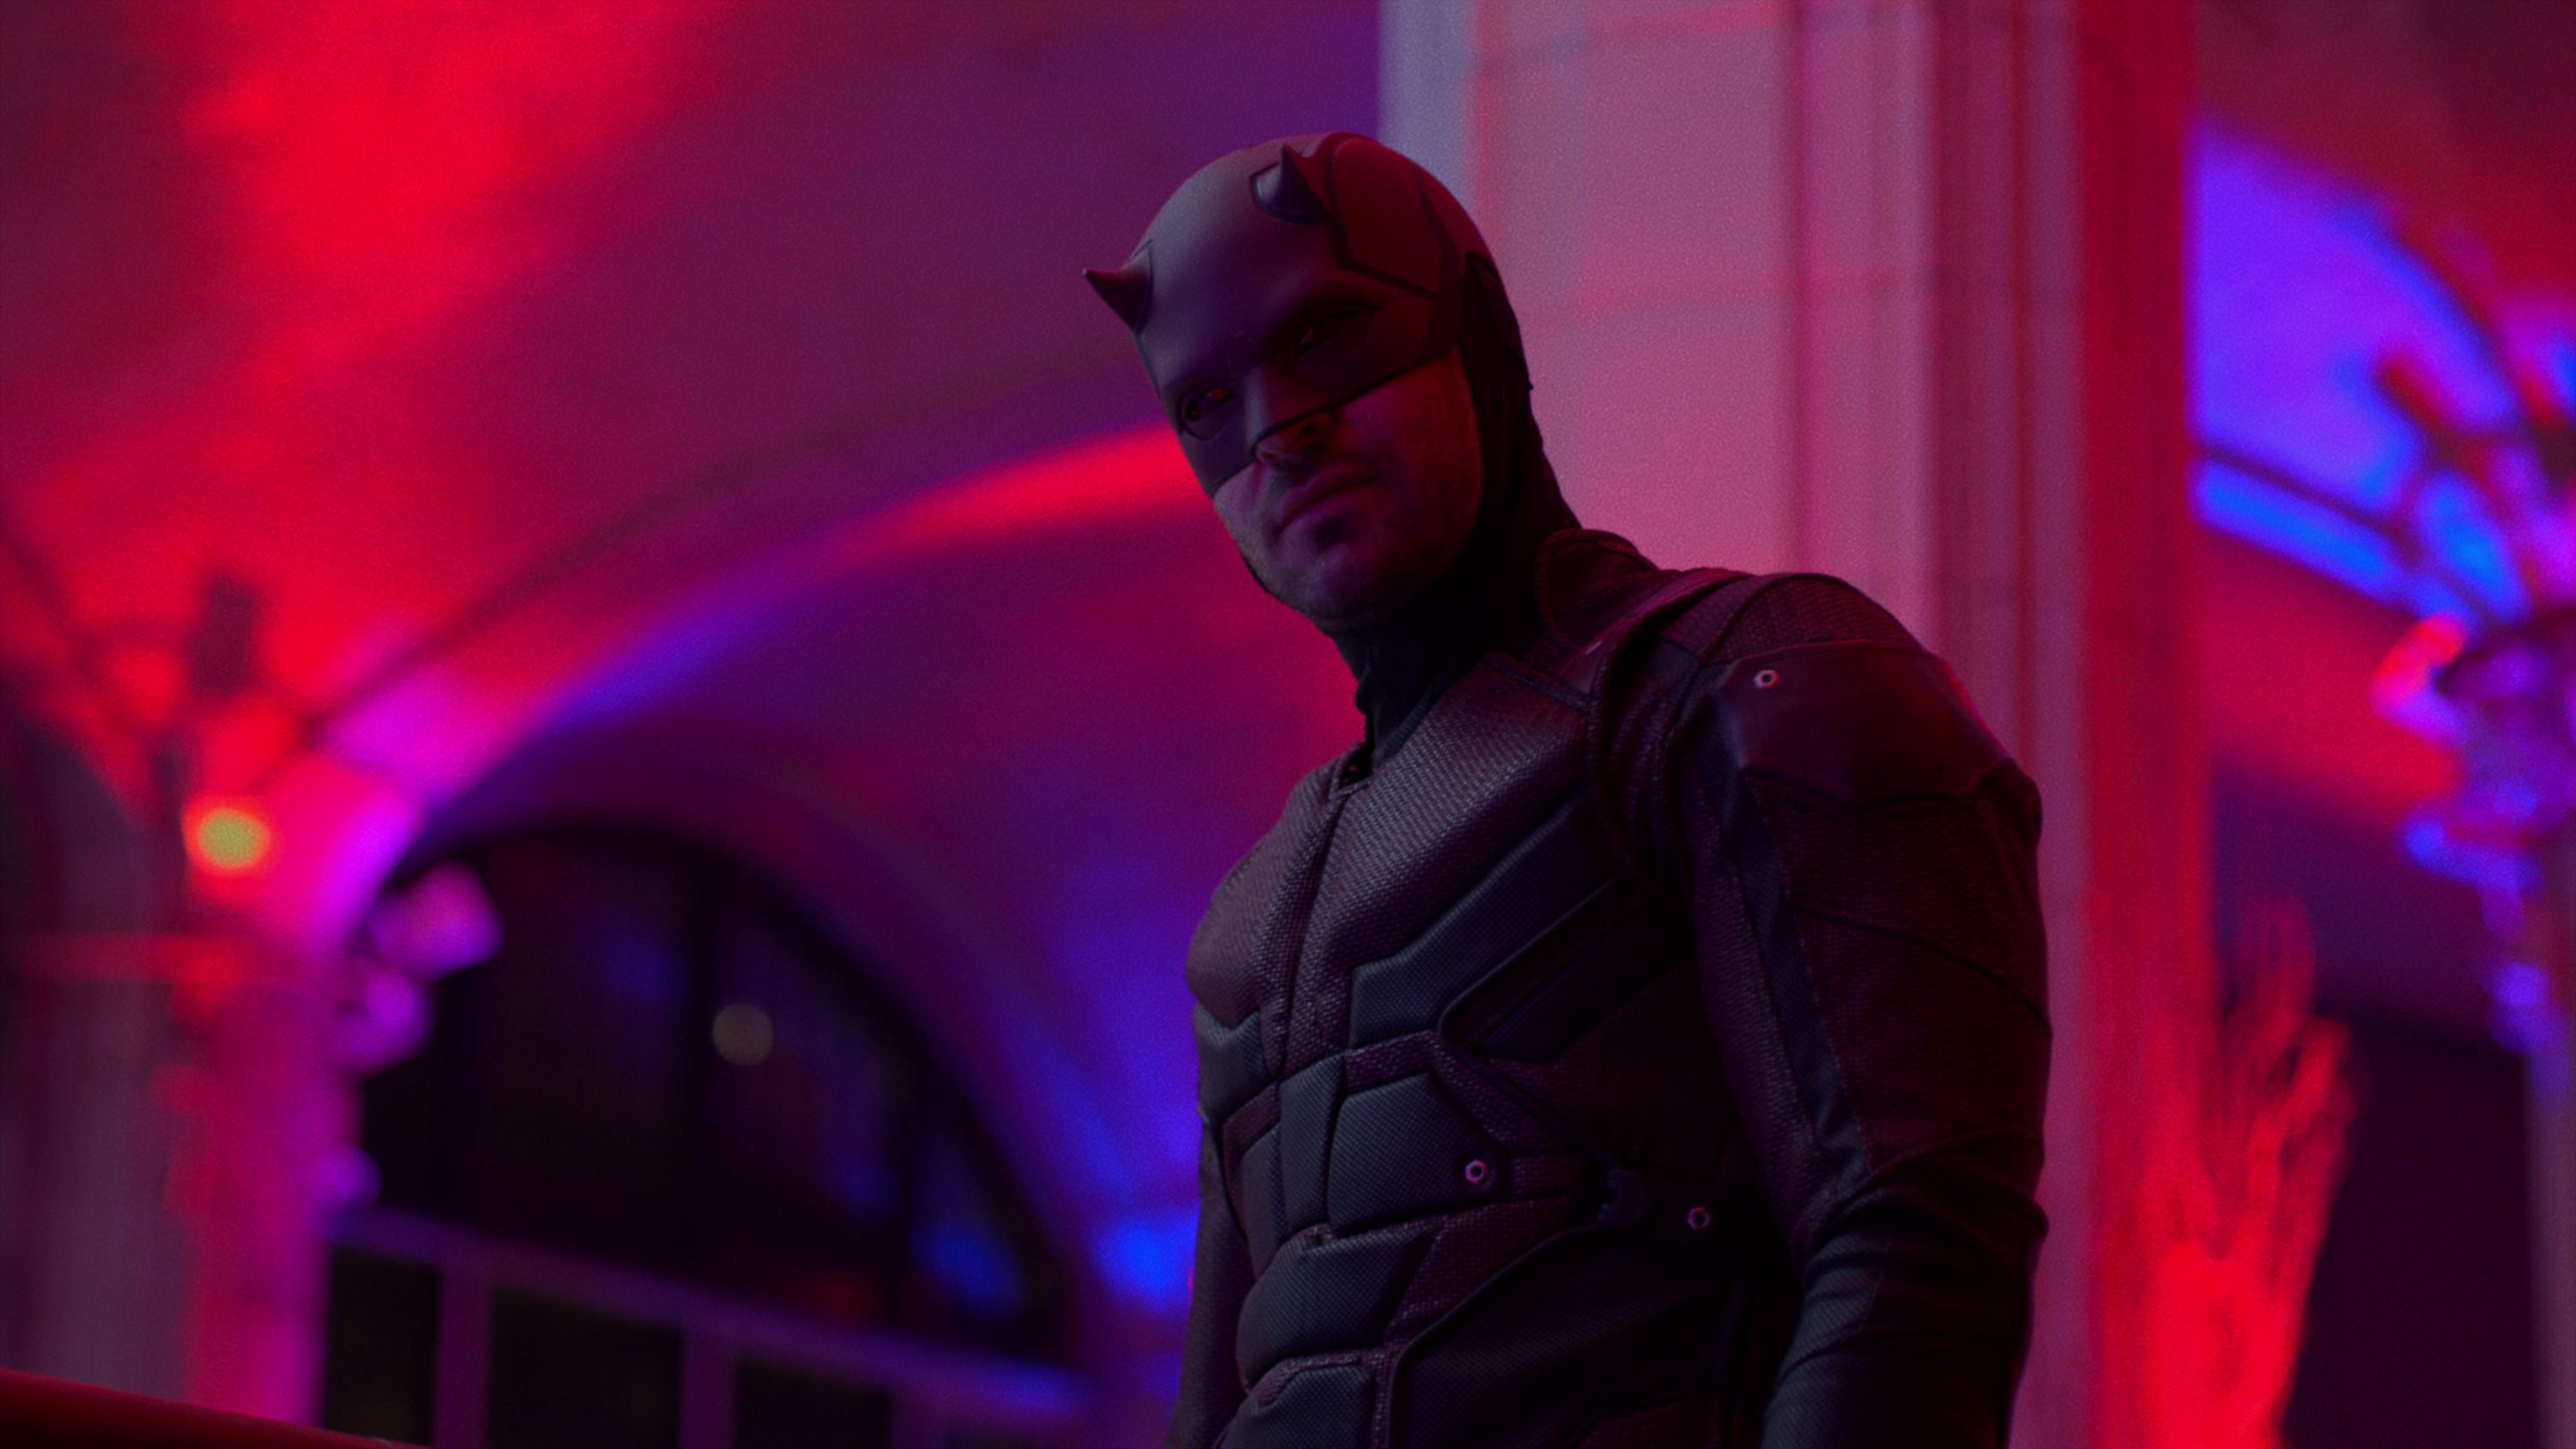 Charlie Cox as Daredevil on The Defenders